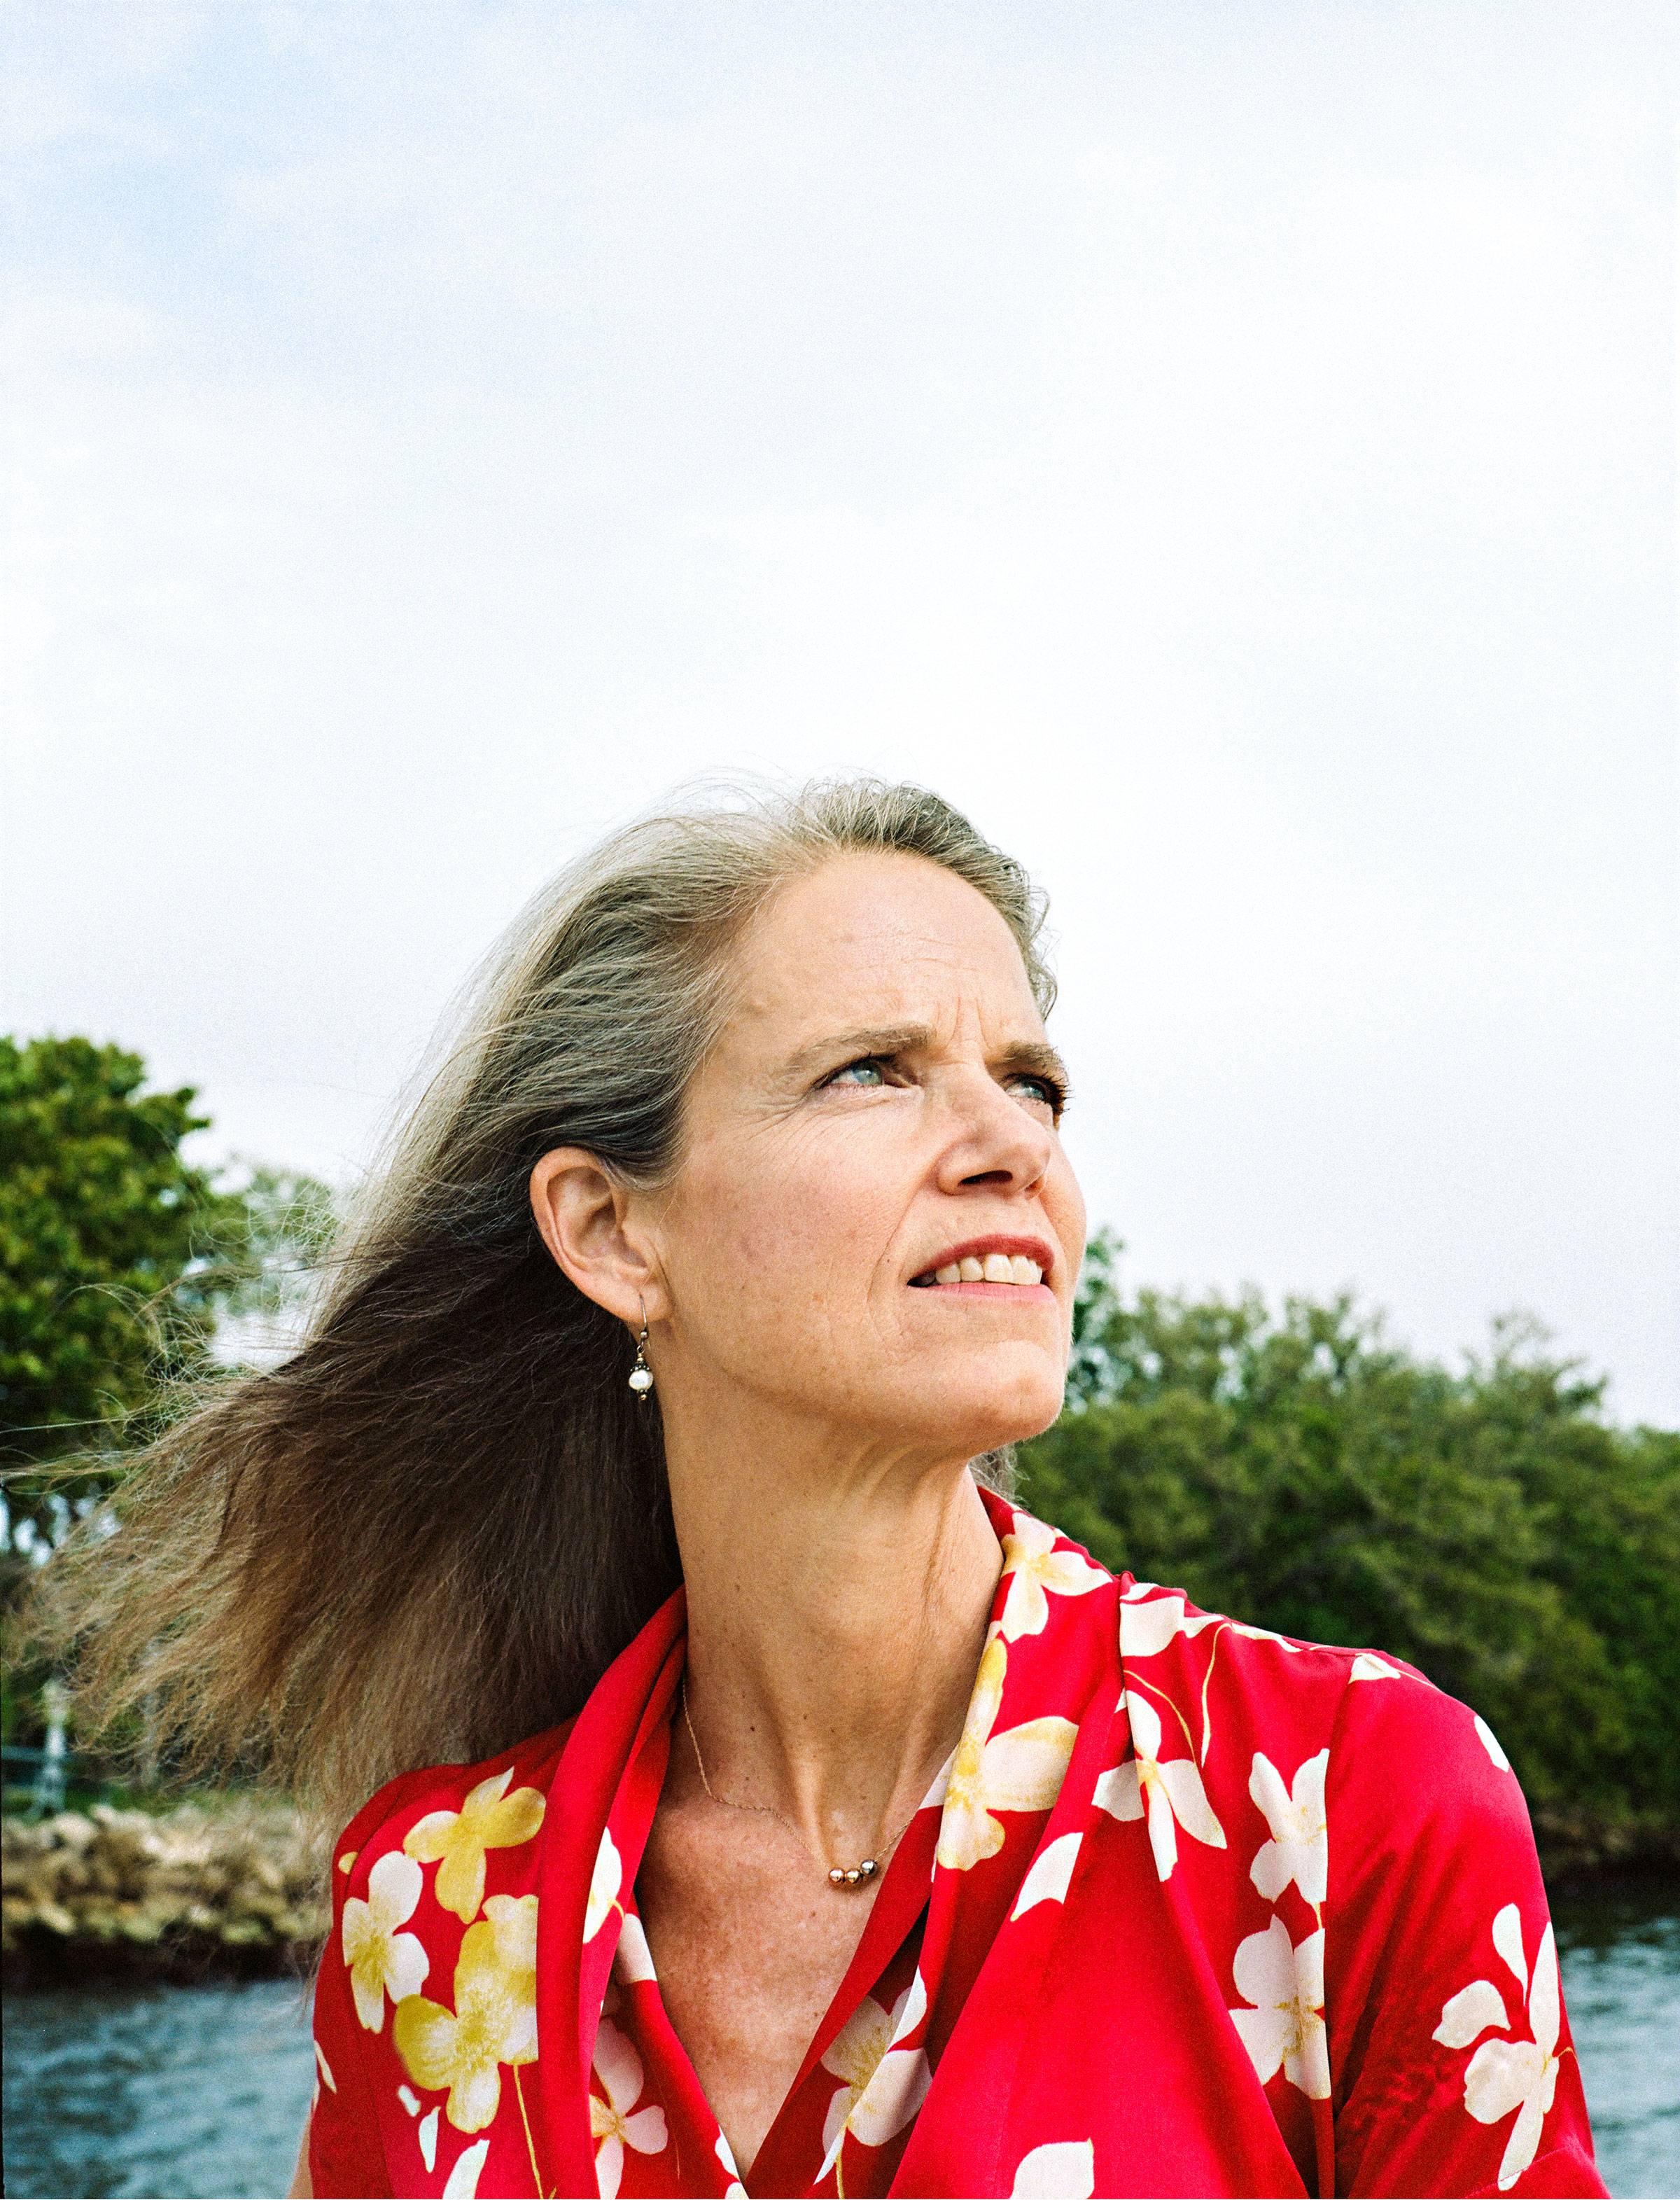 Jane Gilbert, Miami's interim Chief Heat Officer and Resilience Consultant, in the city's Morningside Park on June 18, 2021. (Ysa Pérez for TIME)